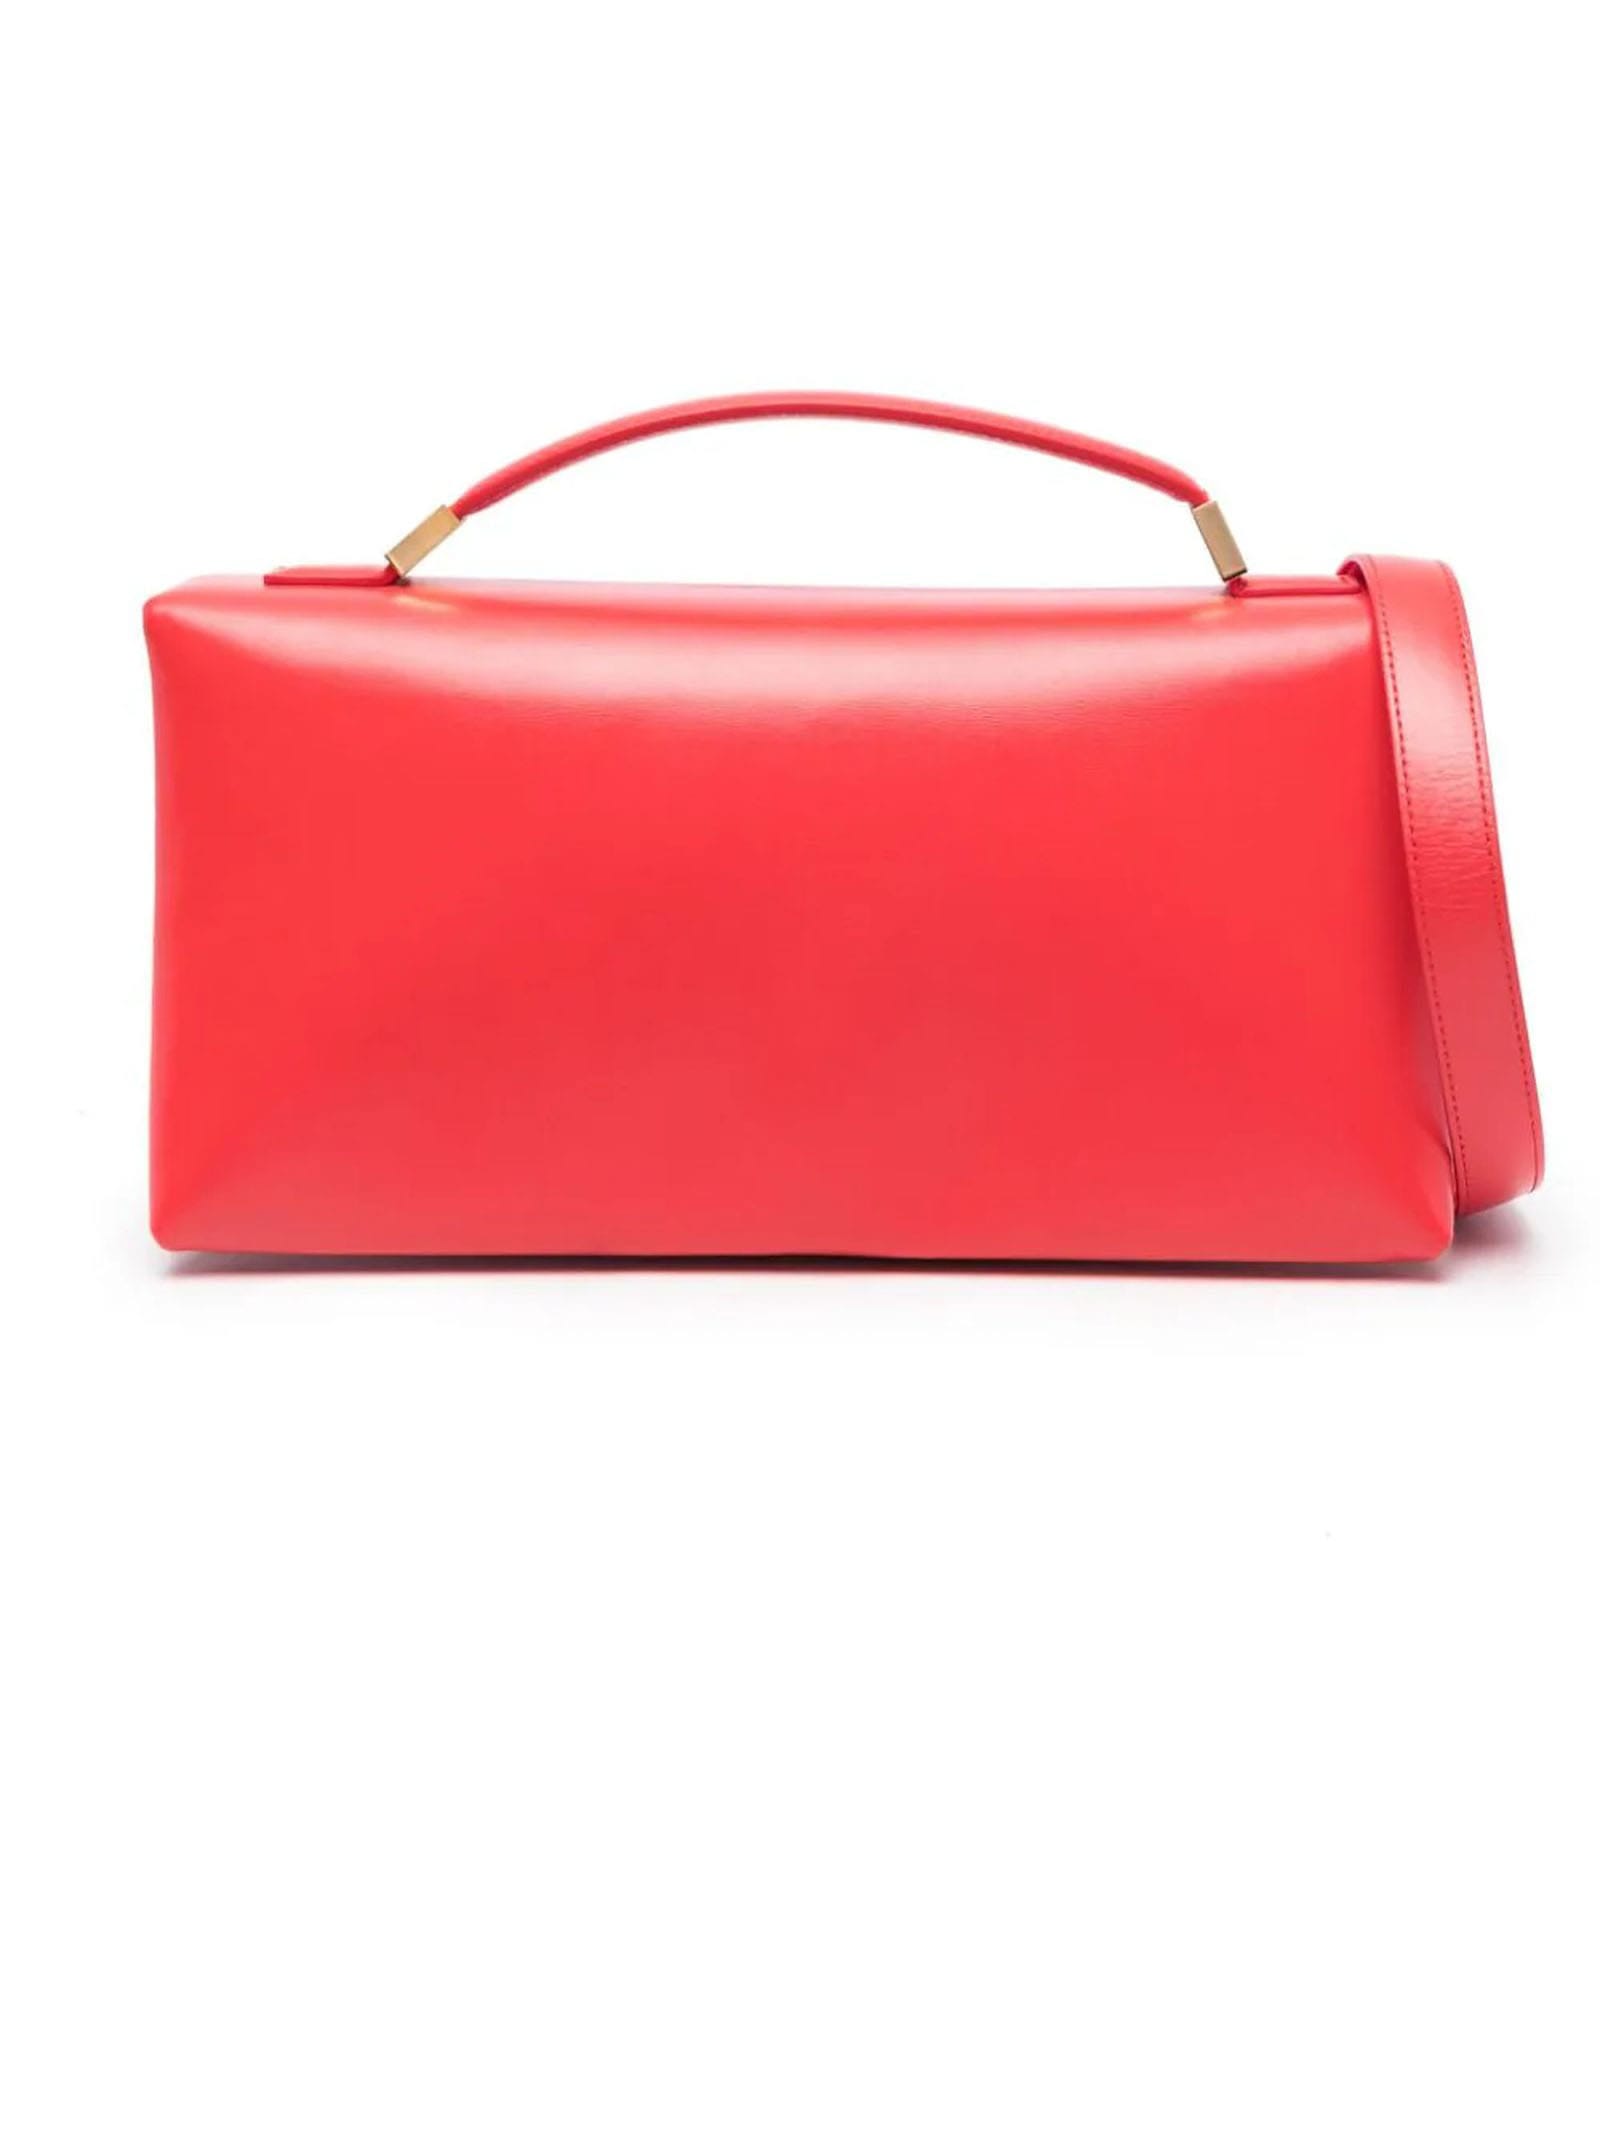 Marni Coral Red Prisma Padded Leather Bag